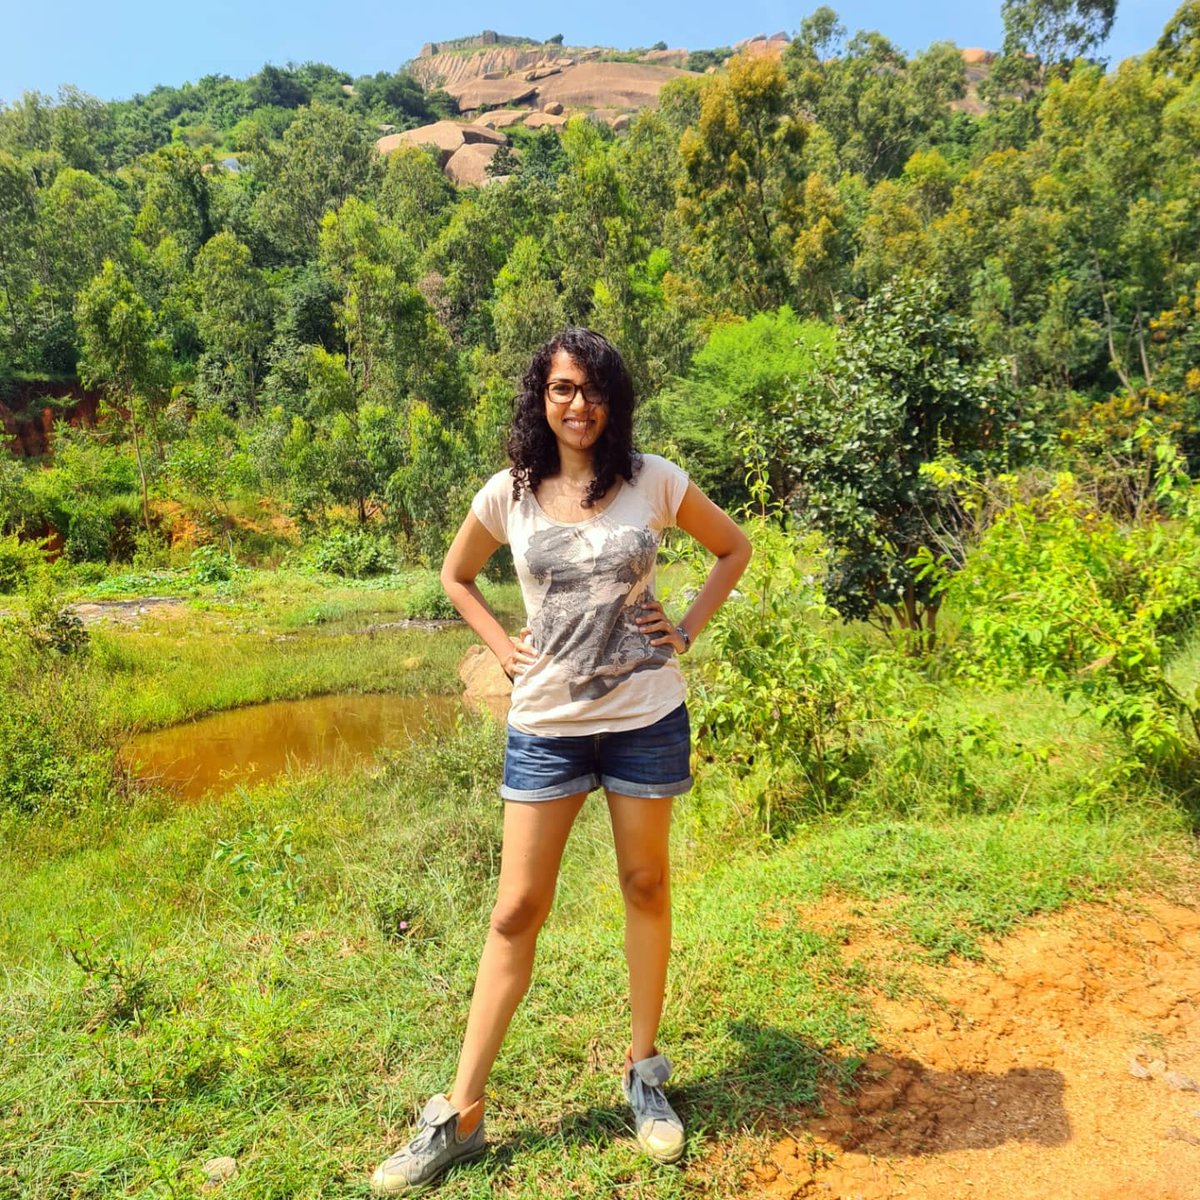 #NewProfilePic
A good way to end the 5 day extended weekend ☺️ Went trekking after such a long gap and it was a good one 😎 #weekdayvibes #extendedweekend #trekking #sceniclocations #karnataka